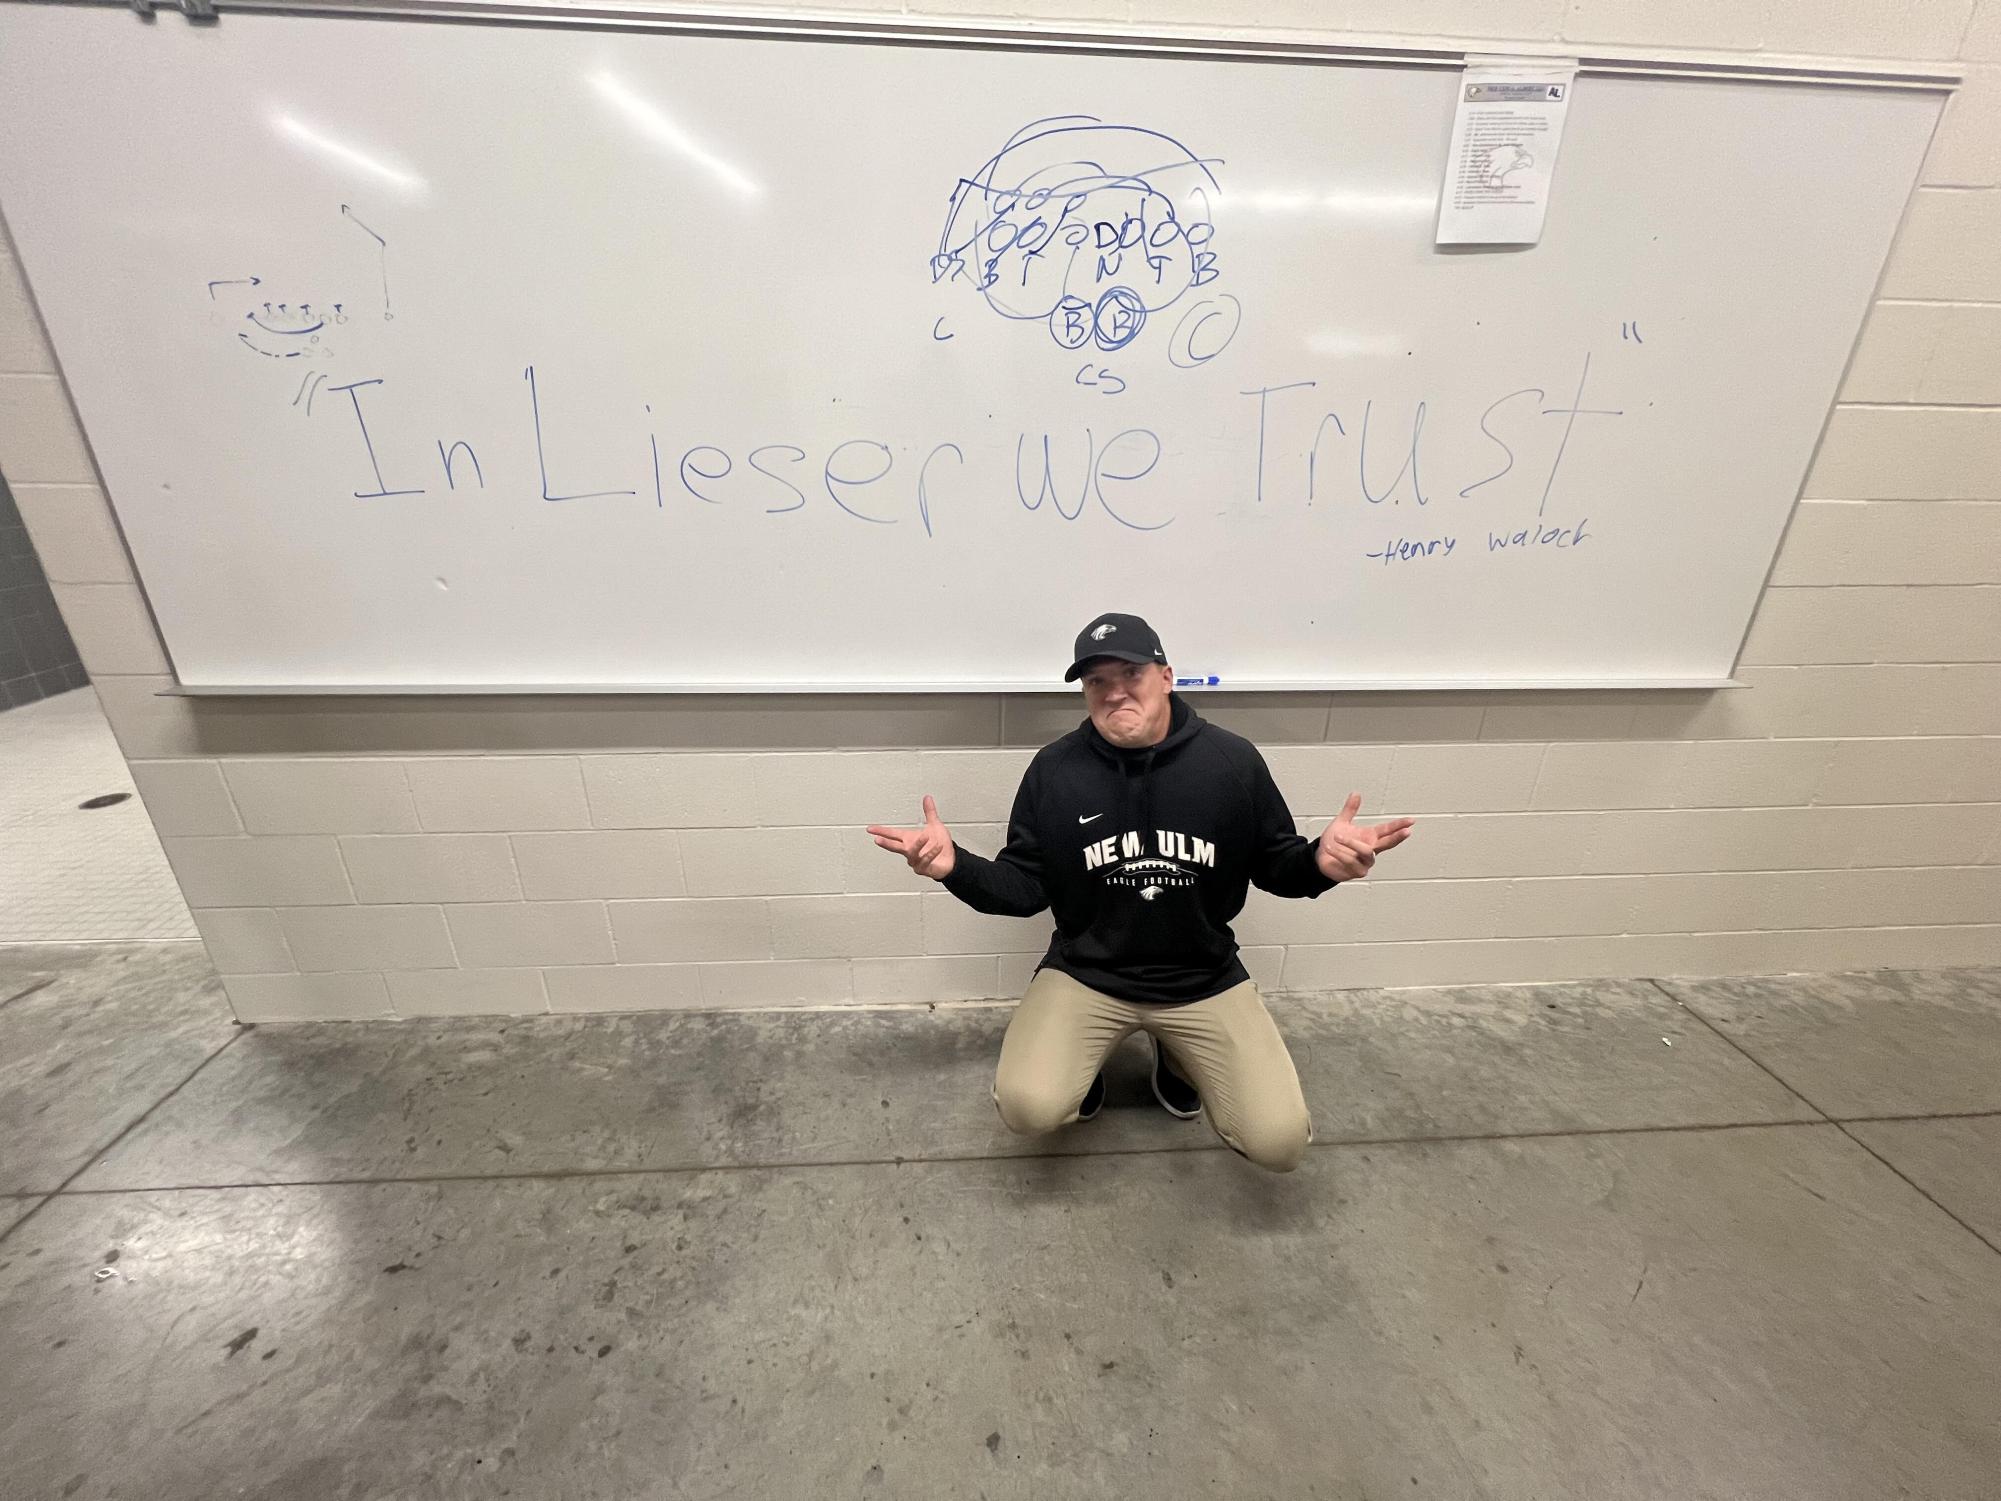 Football coach Derek Lieser poses in front of the white board with a hopeful slogan on it: In Lieser we Trust.